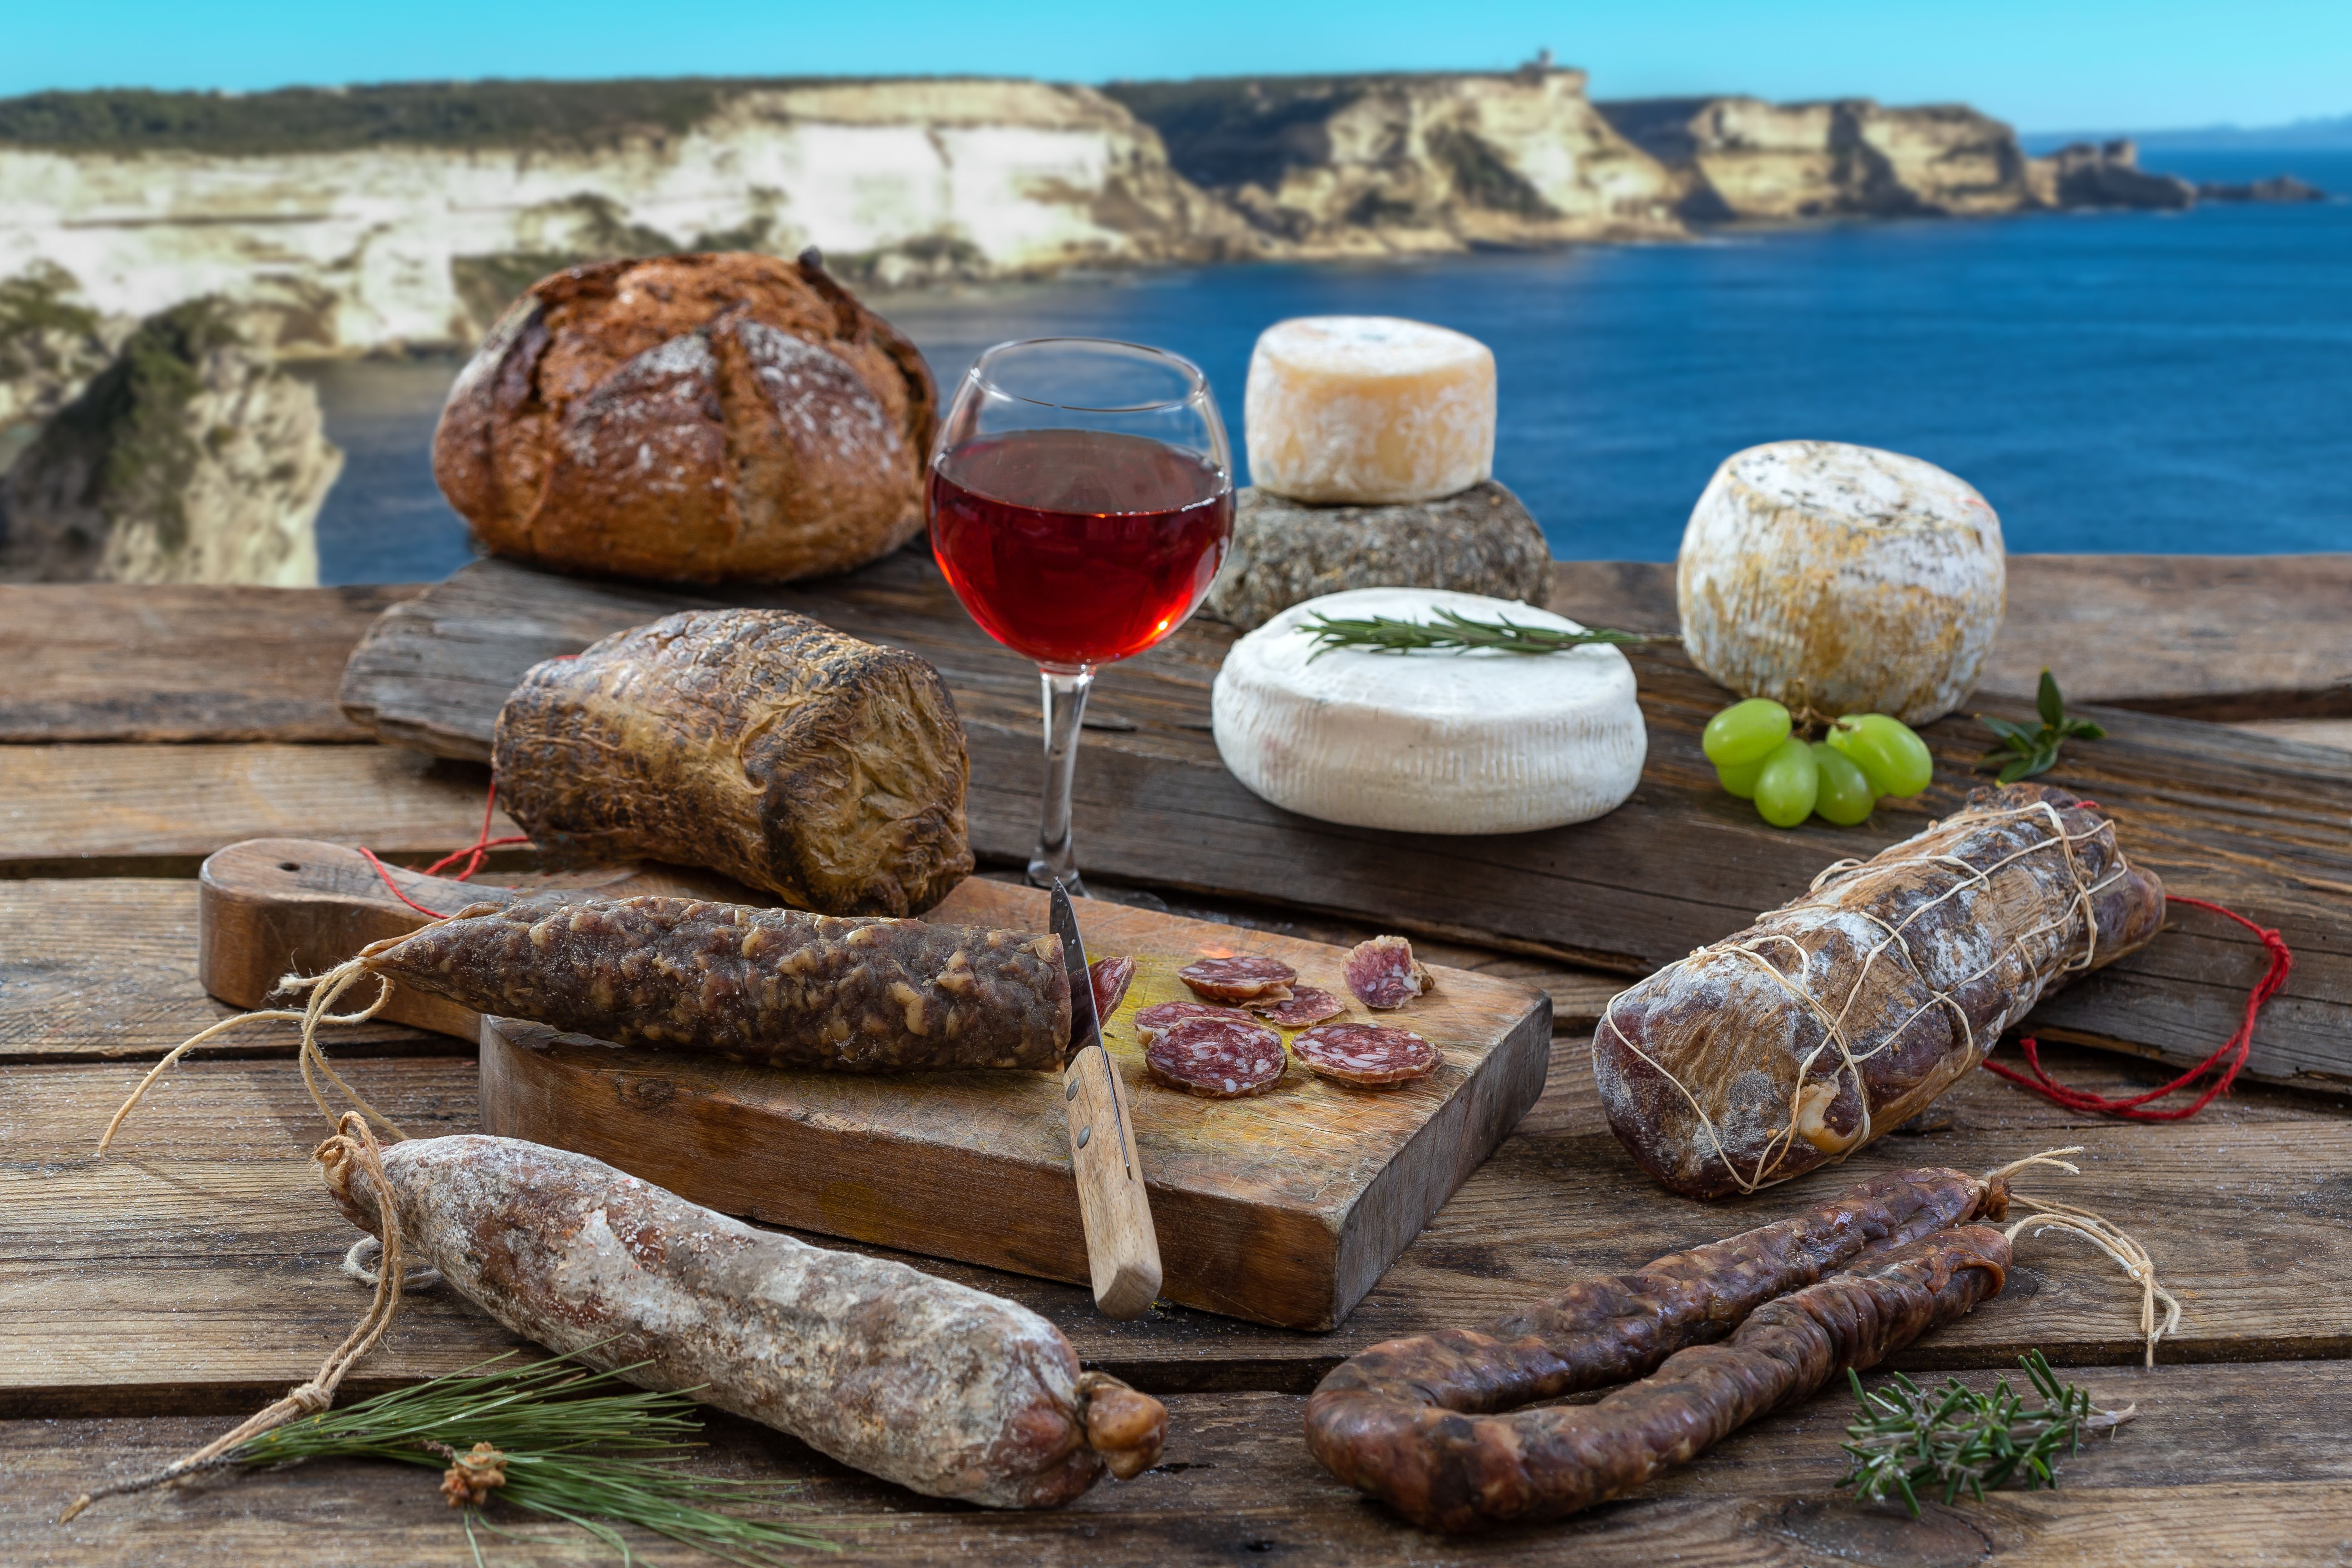 File:Fromage et charcuterie corse.jpg - Wikimedia Commons